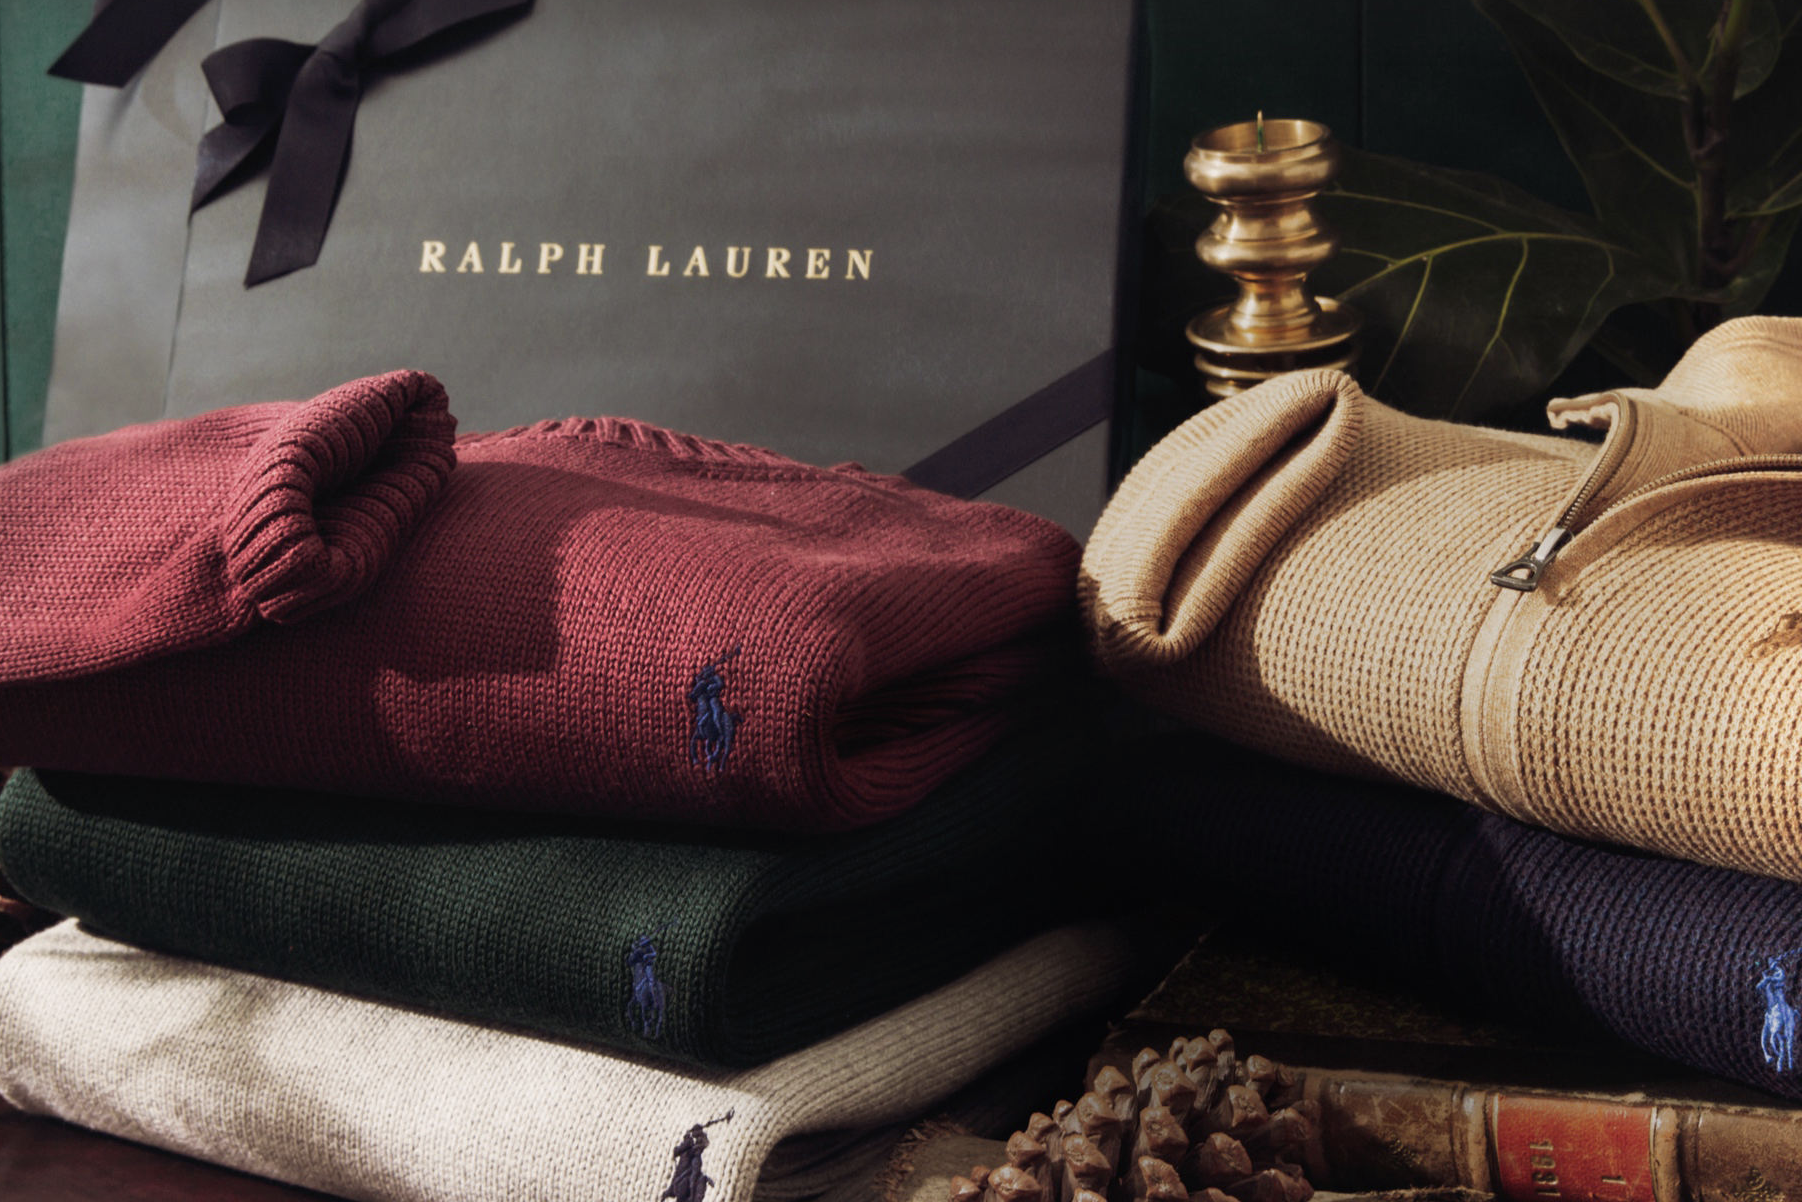 Ralph Lauren Exceeds Revenue and Profit Forecasts, China Sales Jump Over 20% in Q2